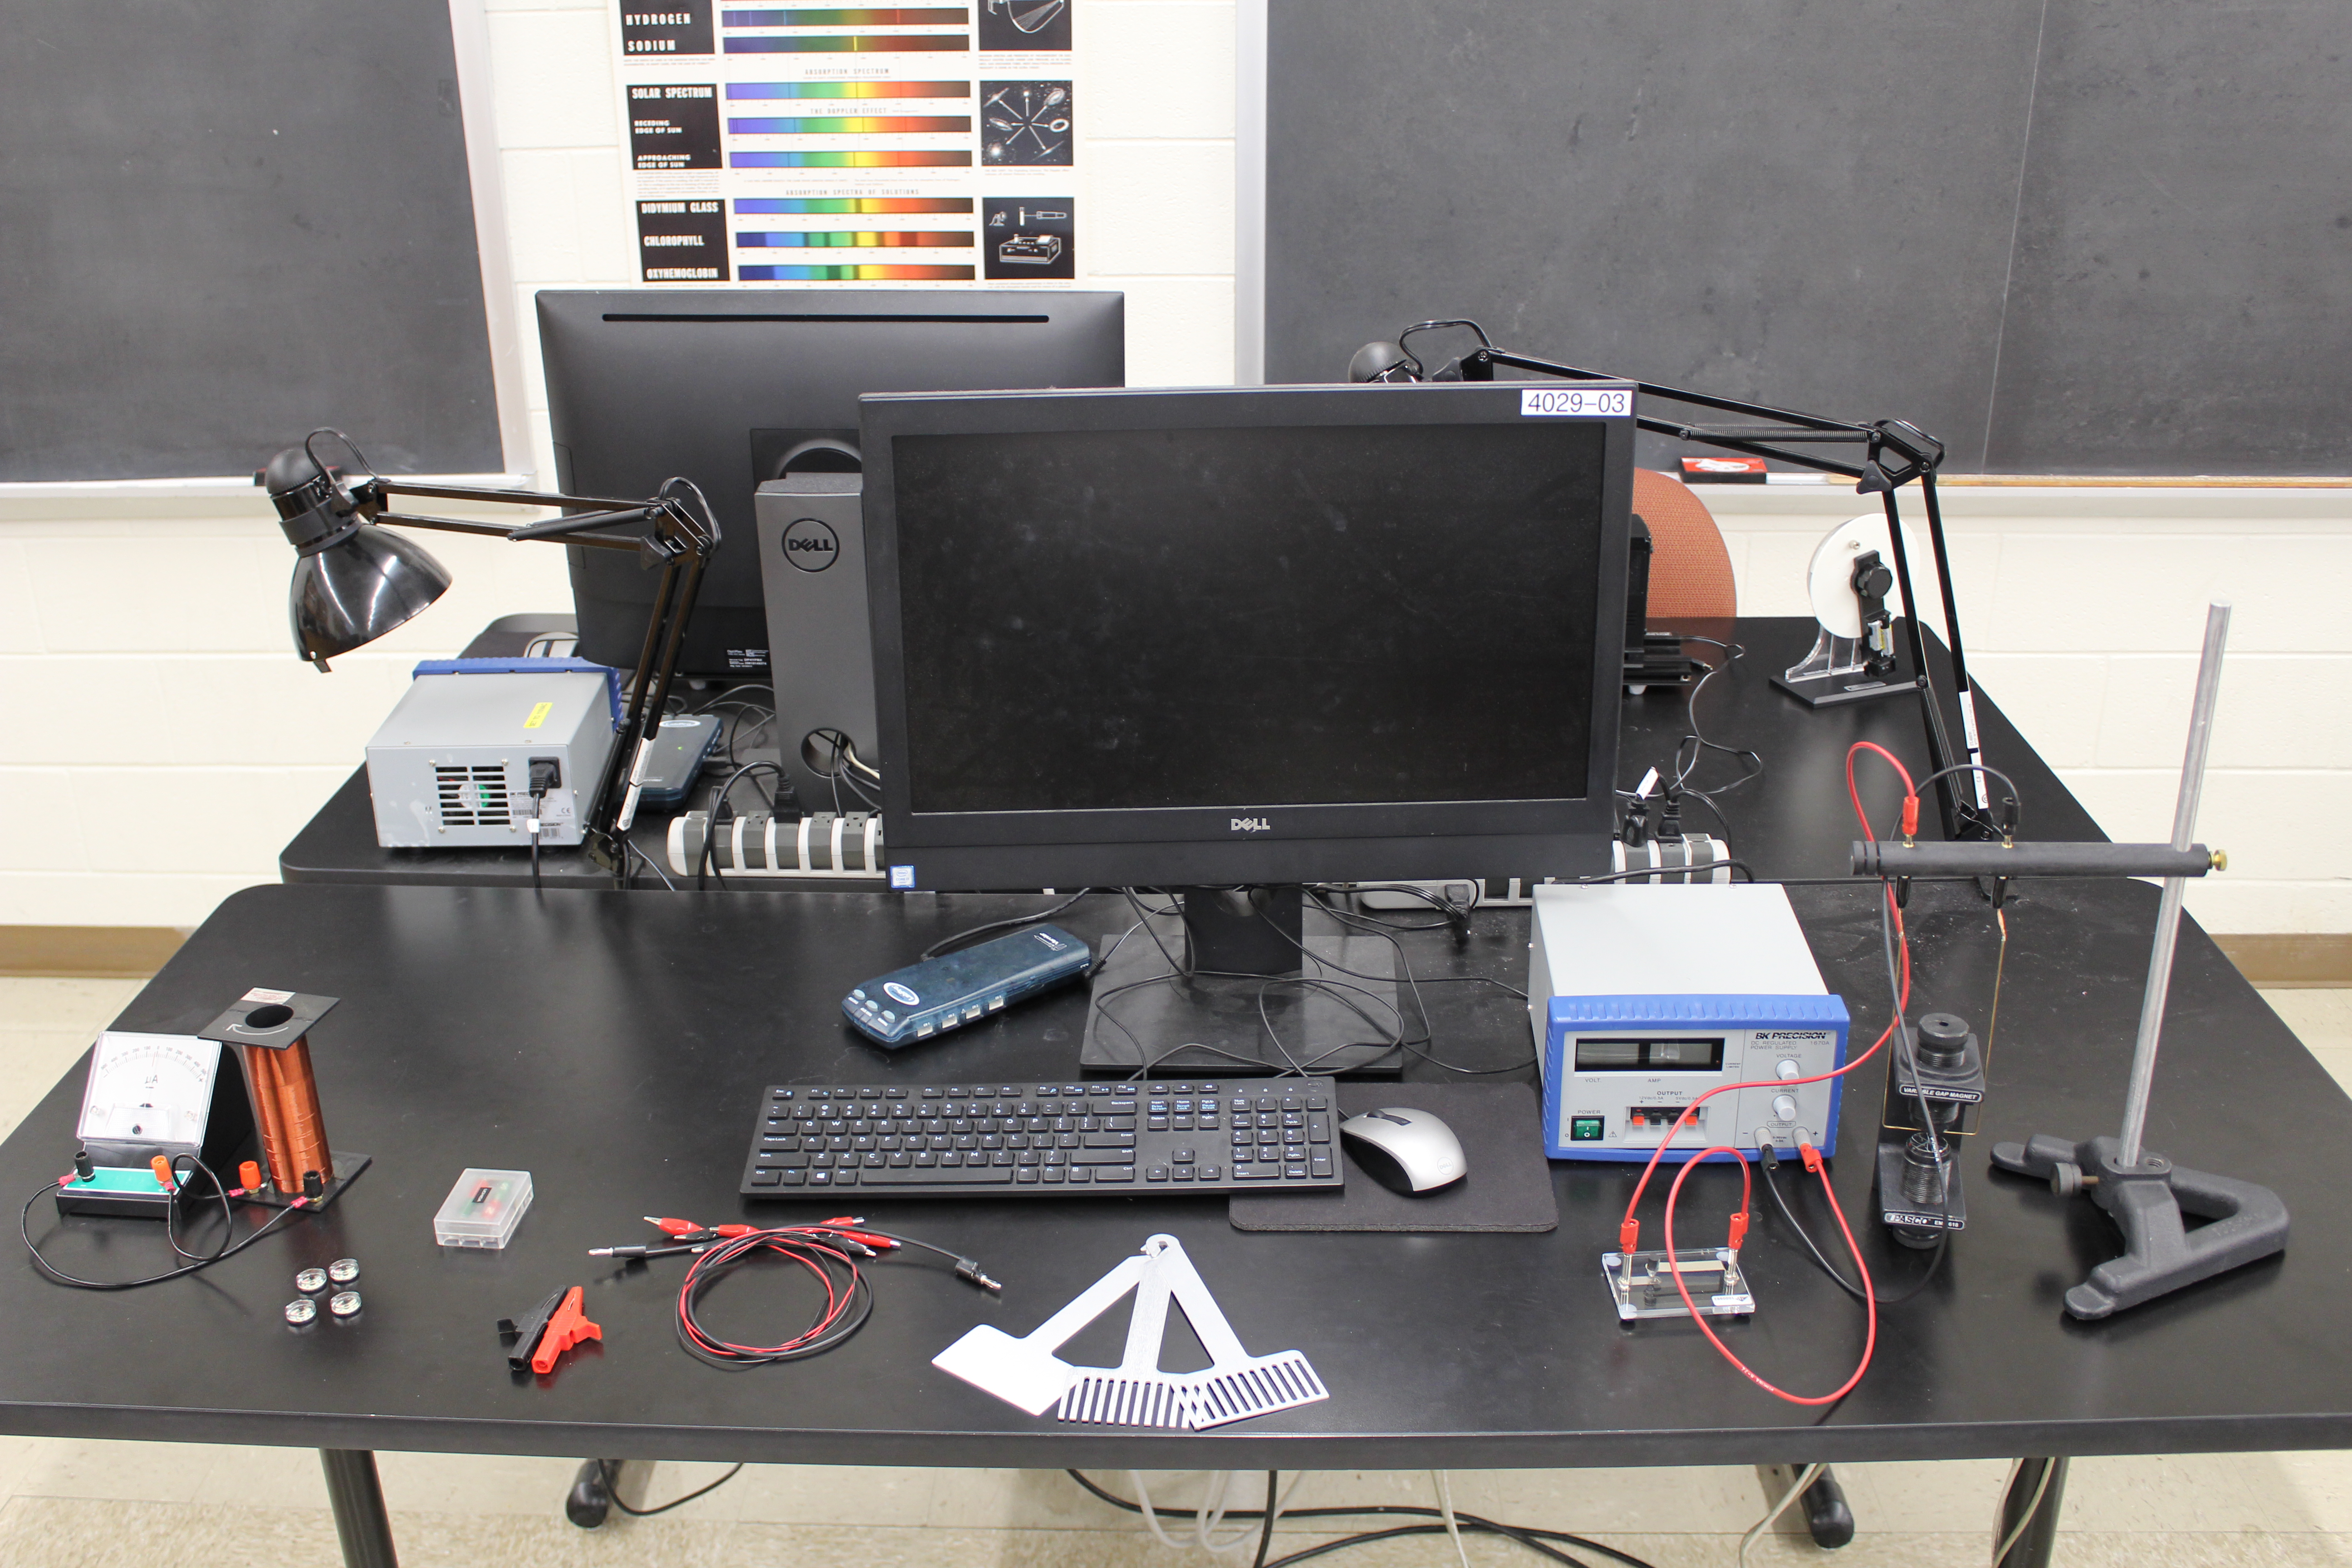 Whole Table Setup of the Magnetic Fields Lab. Galvanometer and Solenoid on the left, Trapeze Setup on the right connected to the power supply. Other Accessories are spread from left to right.